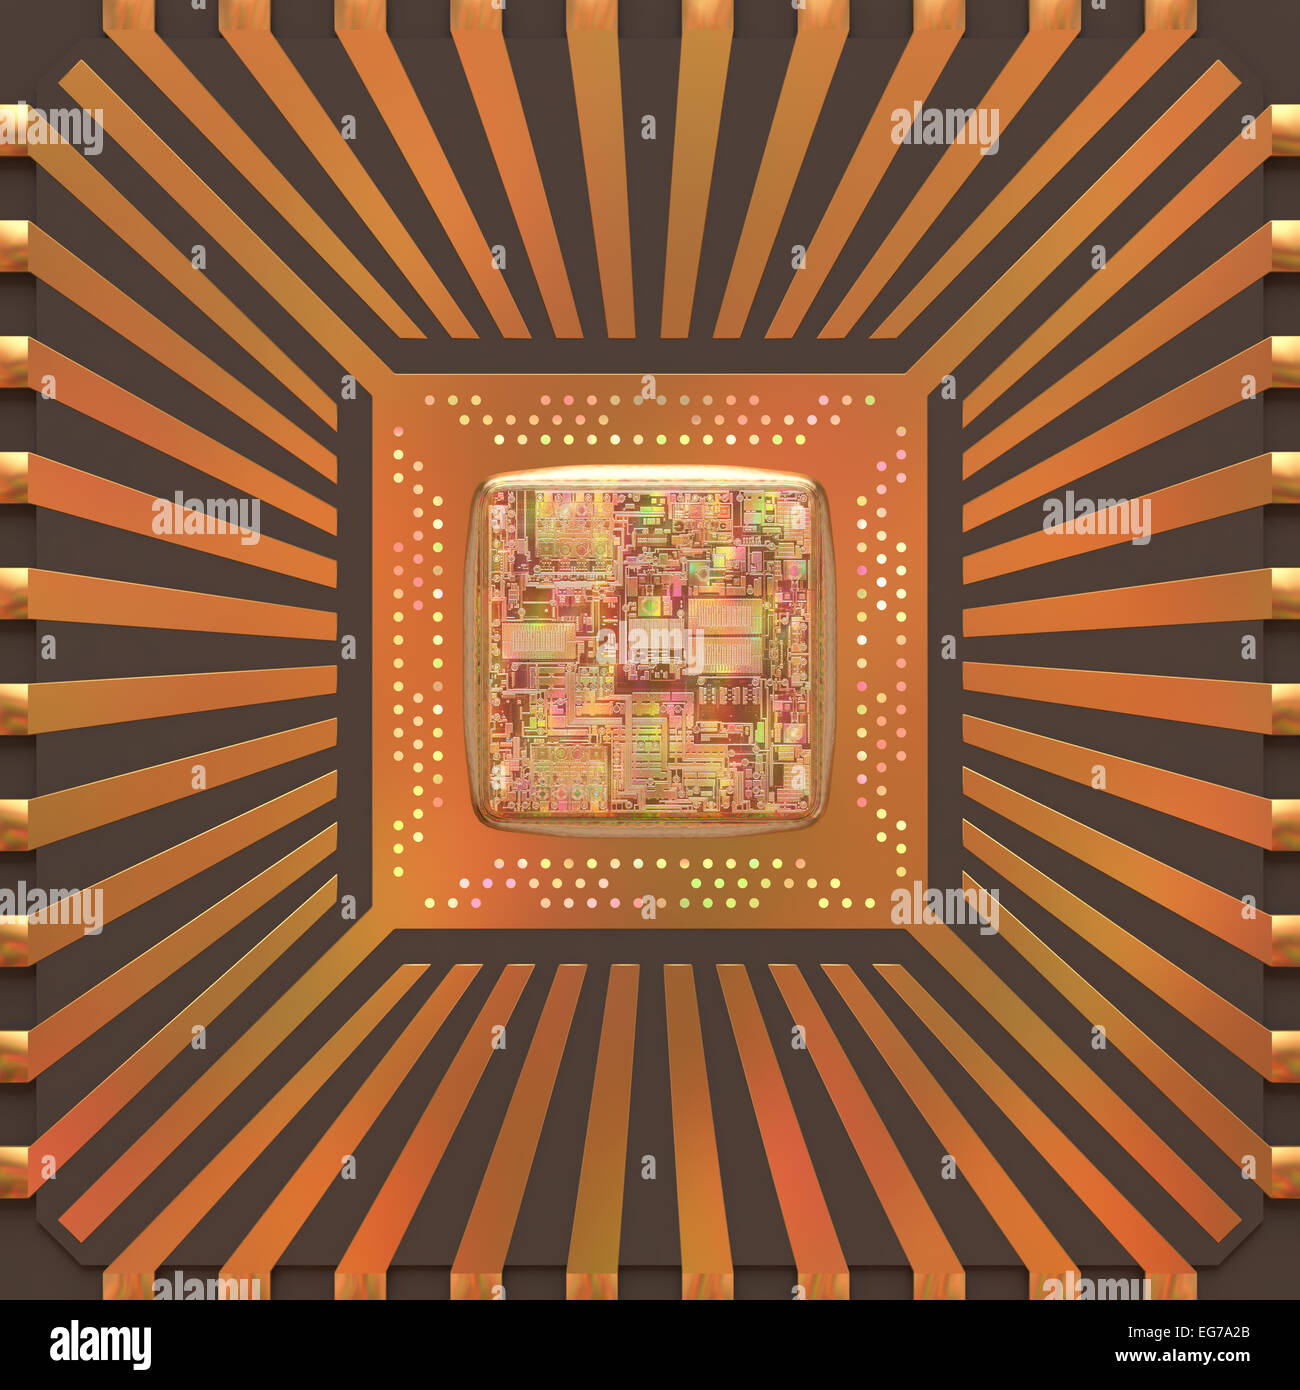 3D image concept of an expansion of the microchip's core. Stock Photo